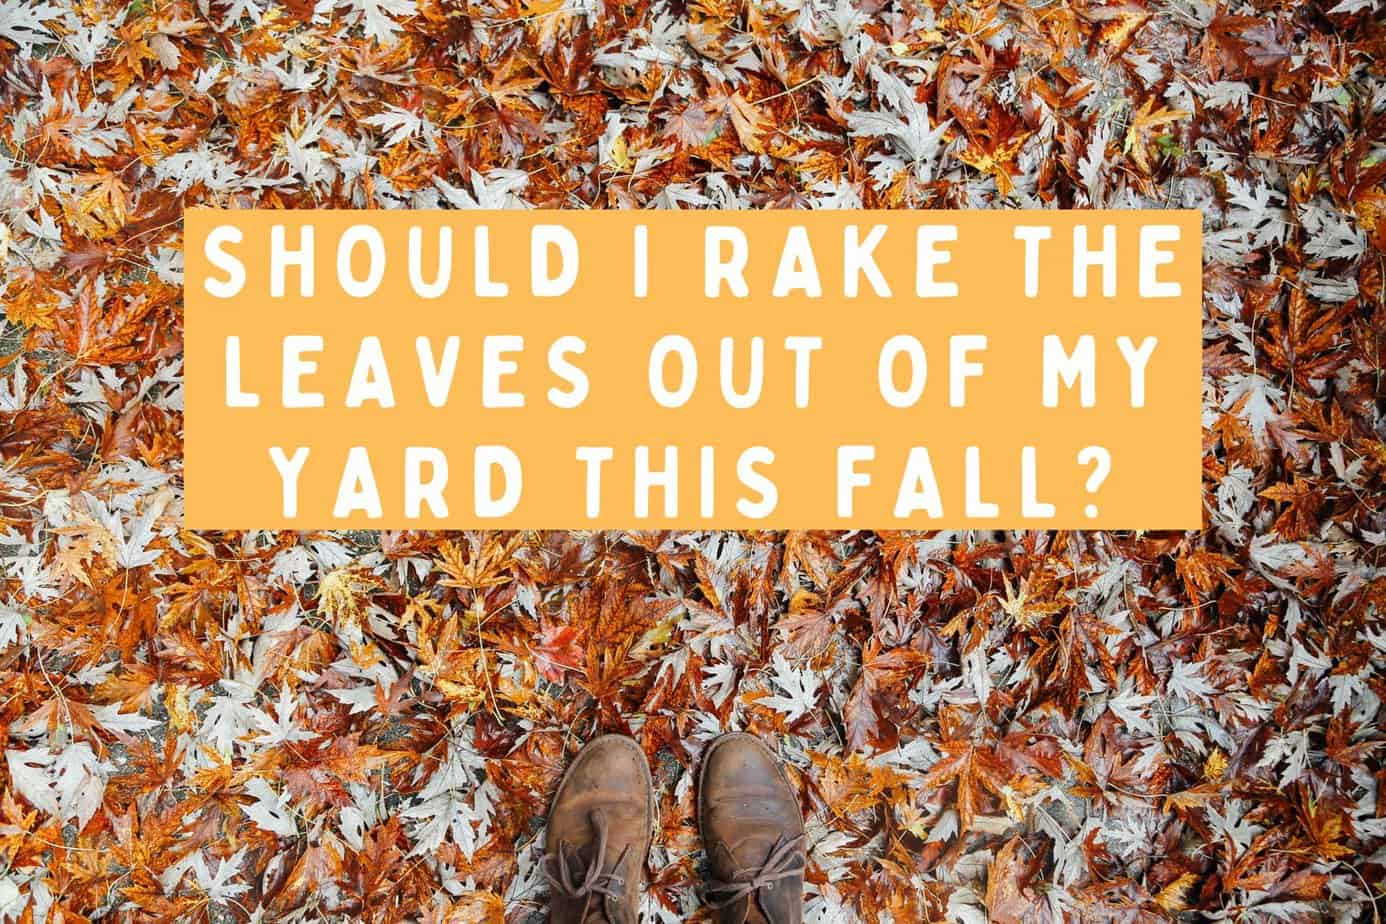 should i rake the leaves out of my yard this fall?